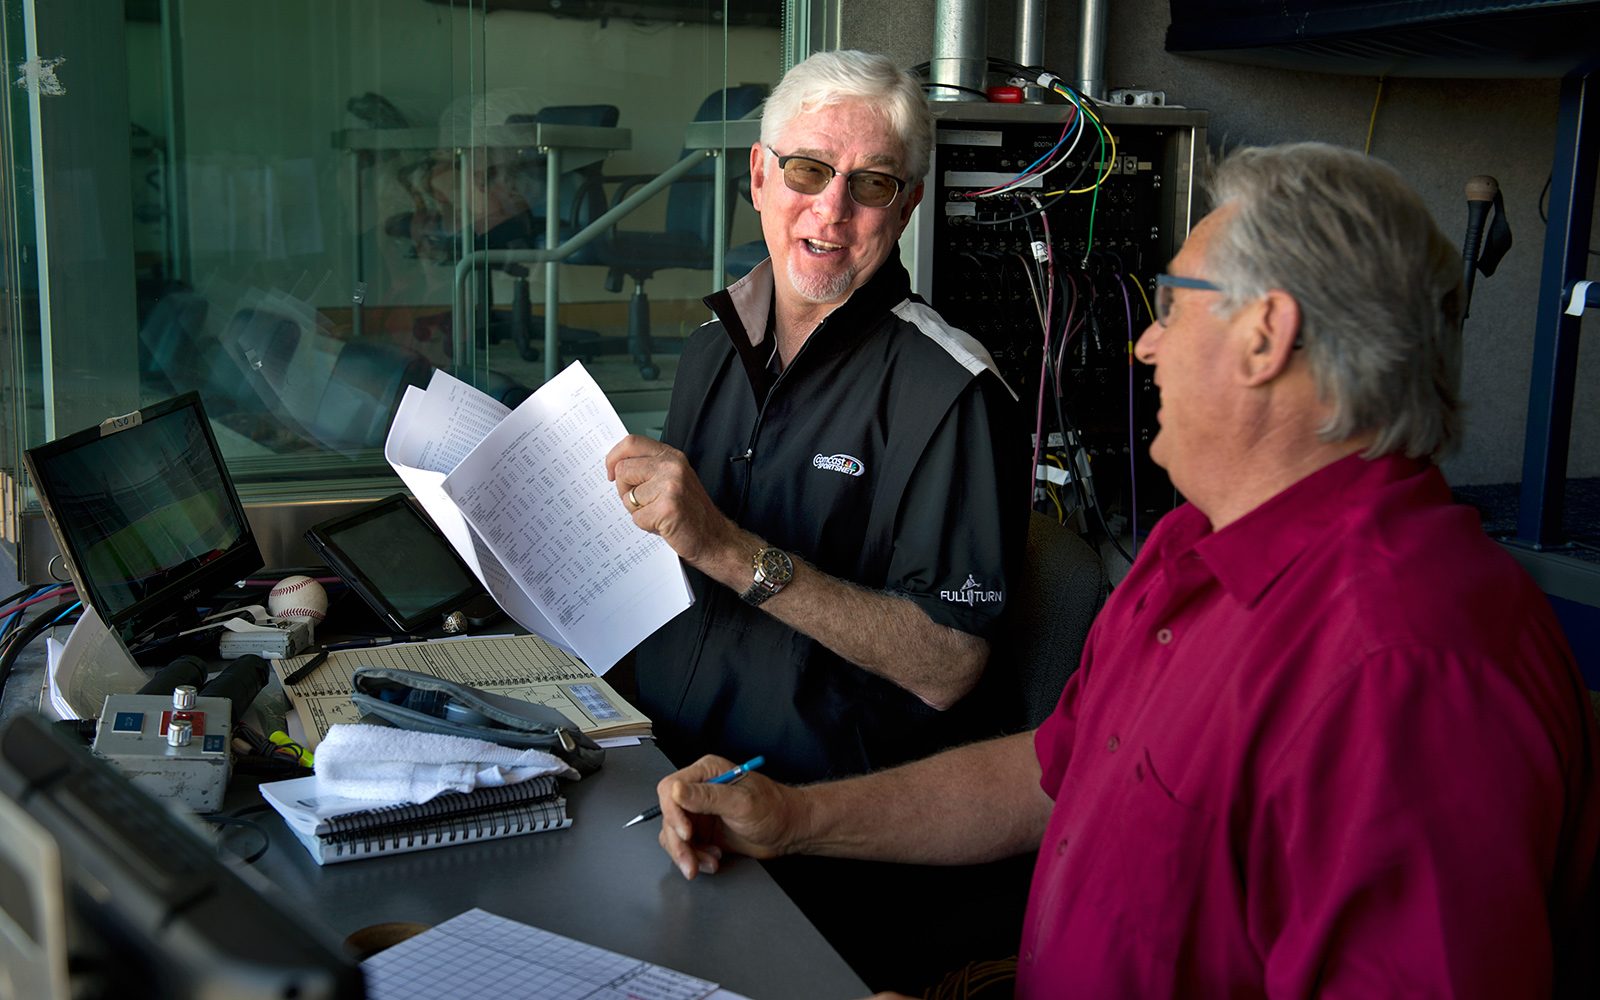 The Giant friendship between San Francisco Giants announcers Mike Krukow and Duane Kuiper